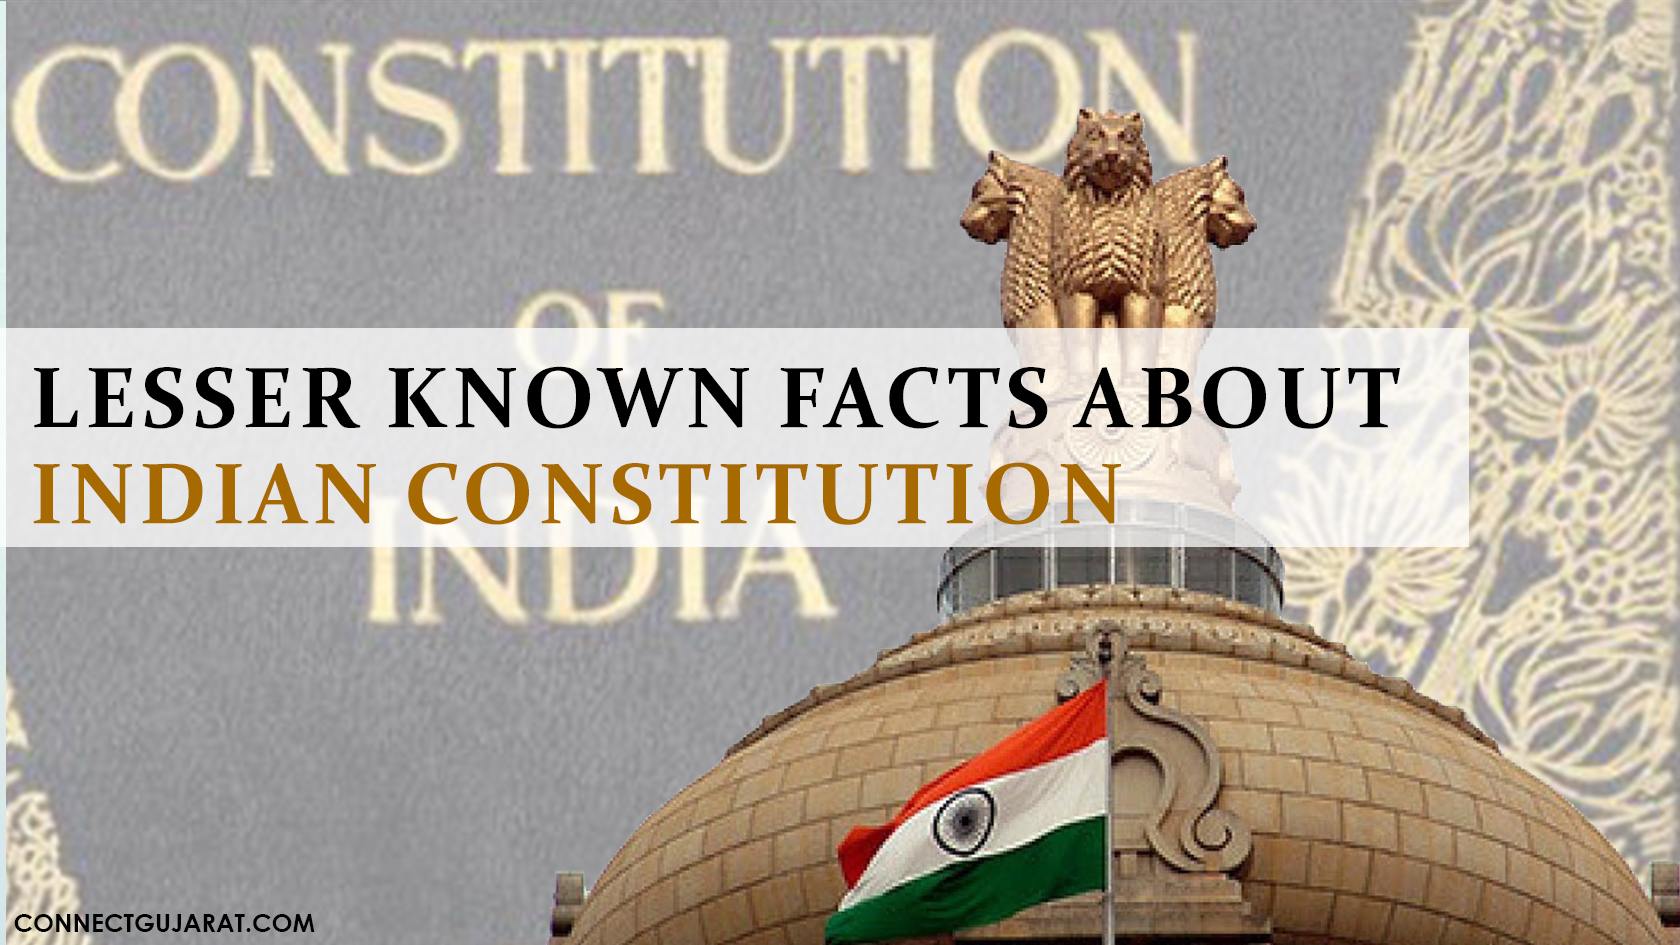 Lesser known facts about Indian constitution